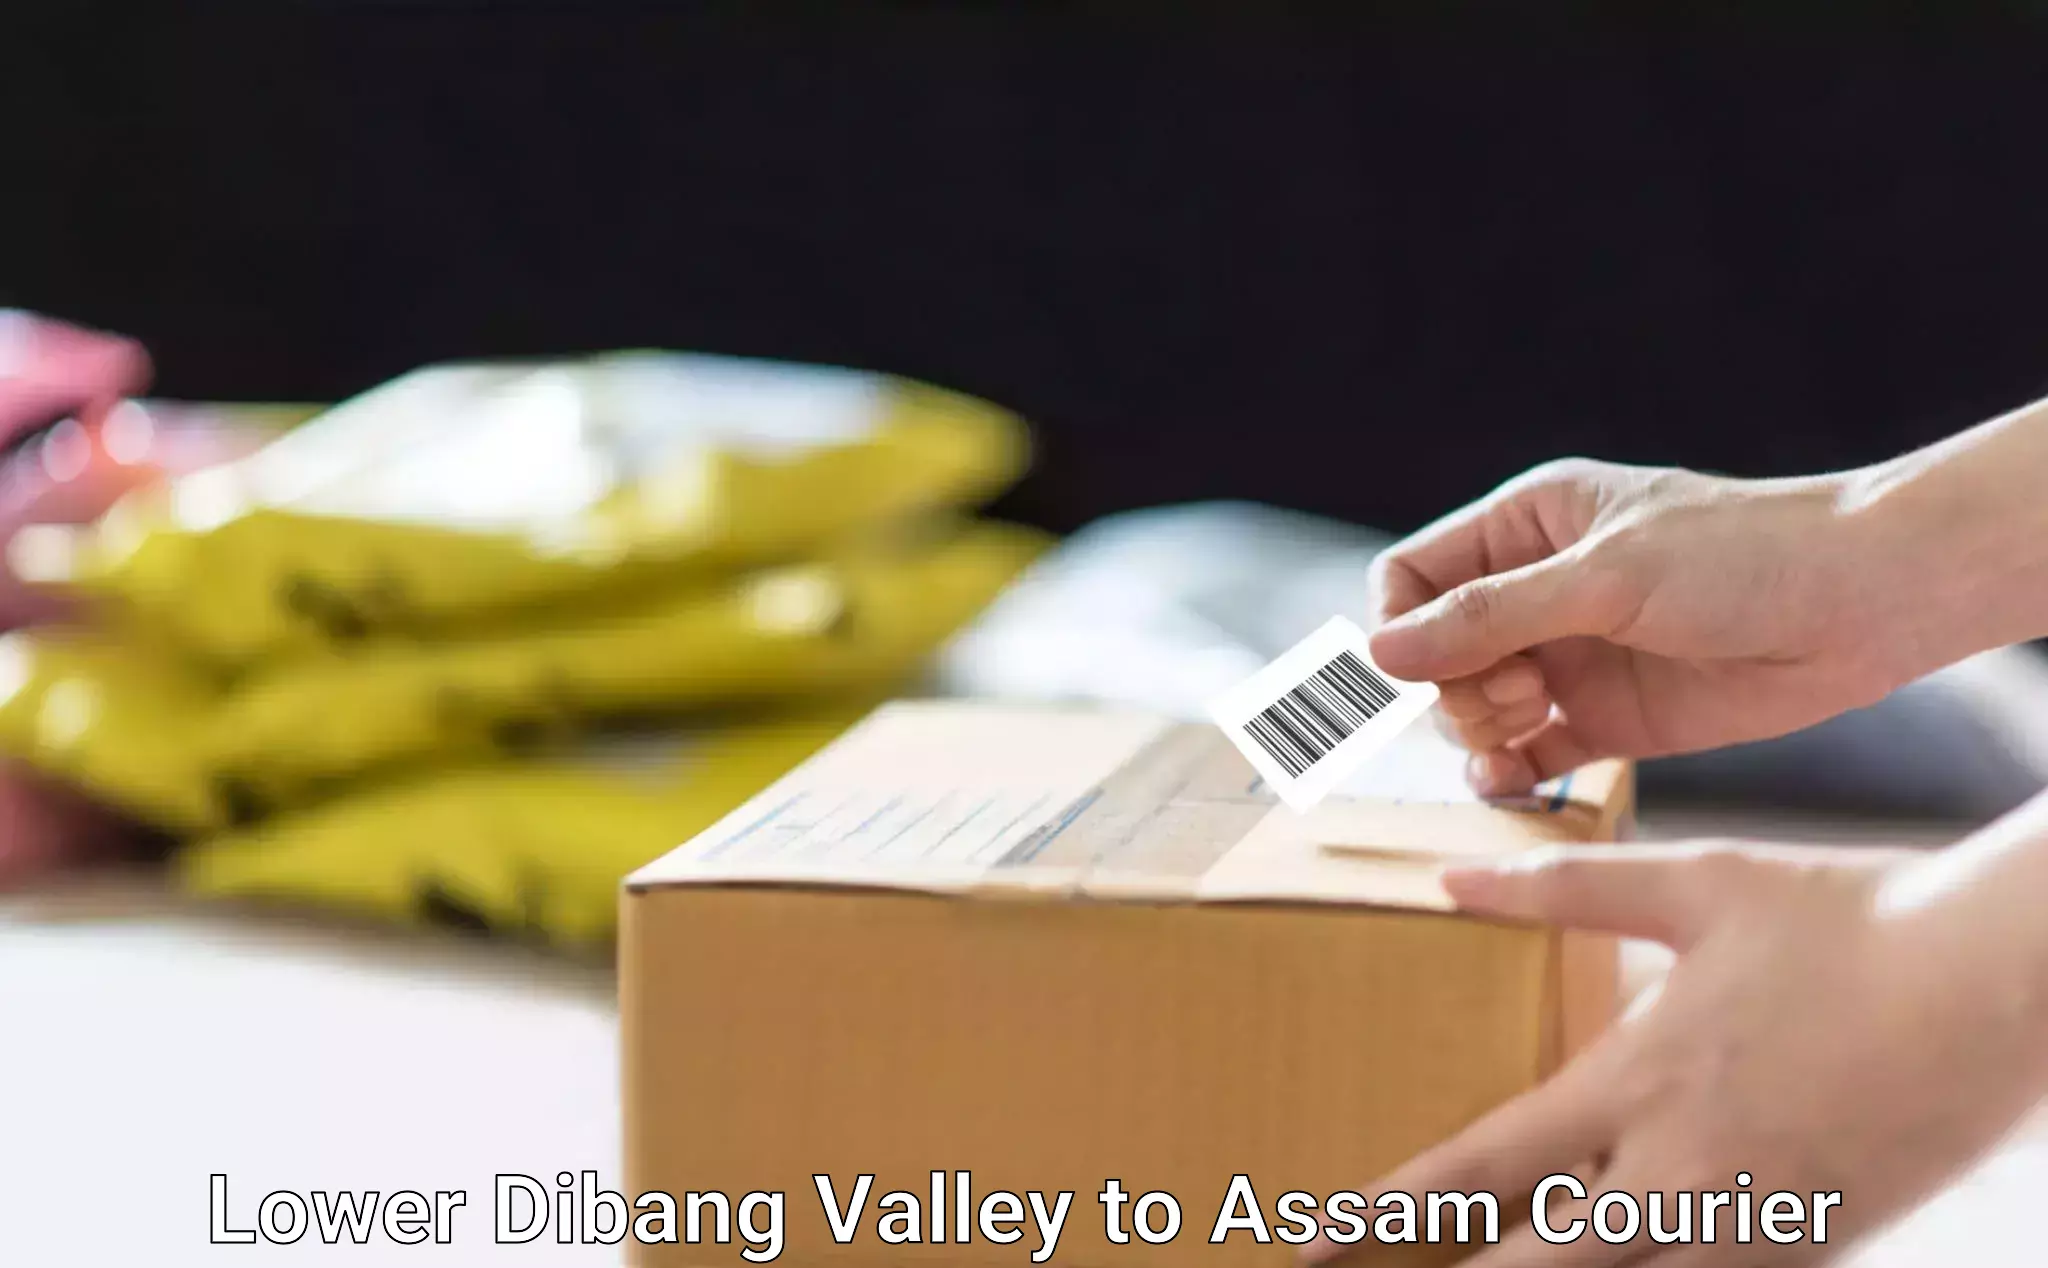 Cash on delivery service in Lower Dibang Valley to Morigaon